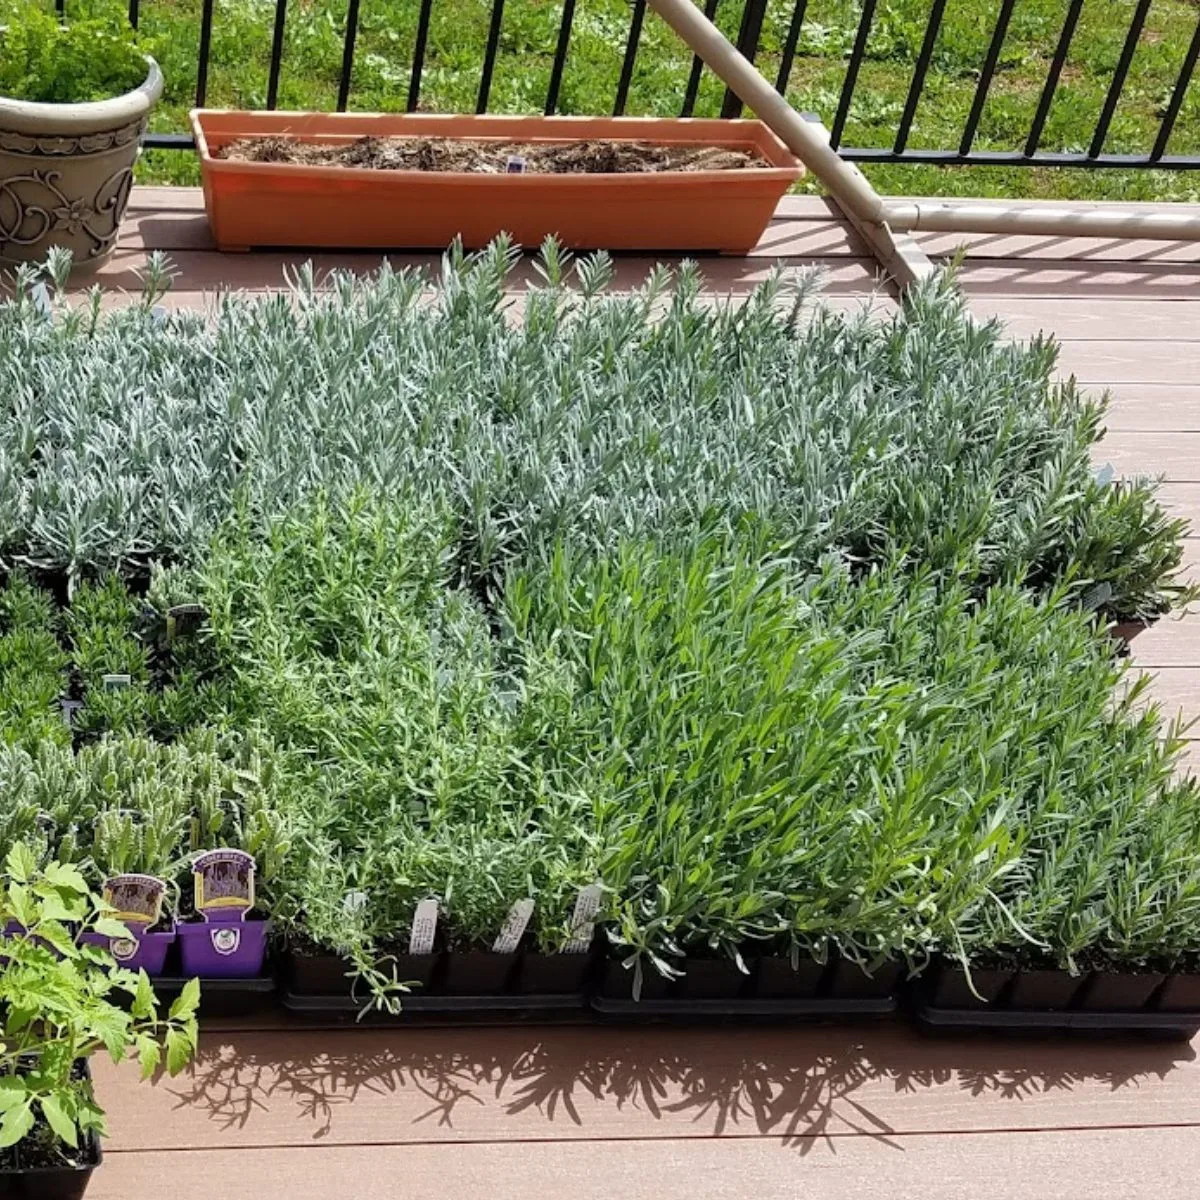 Lavender plants in flats on my porch, waiting to be planted.